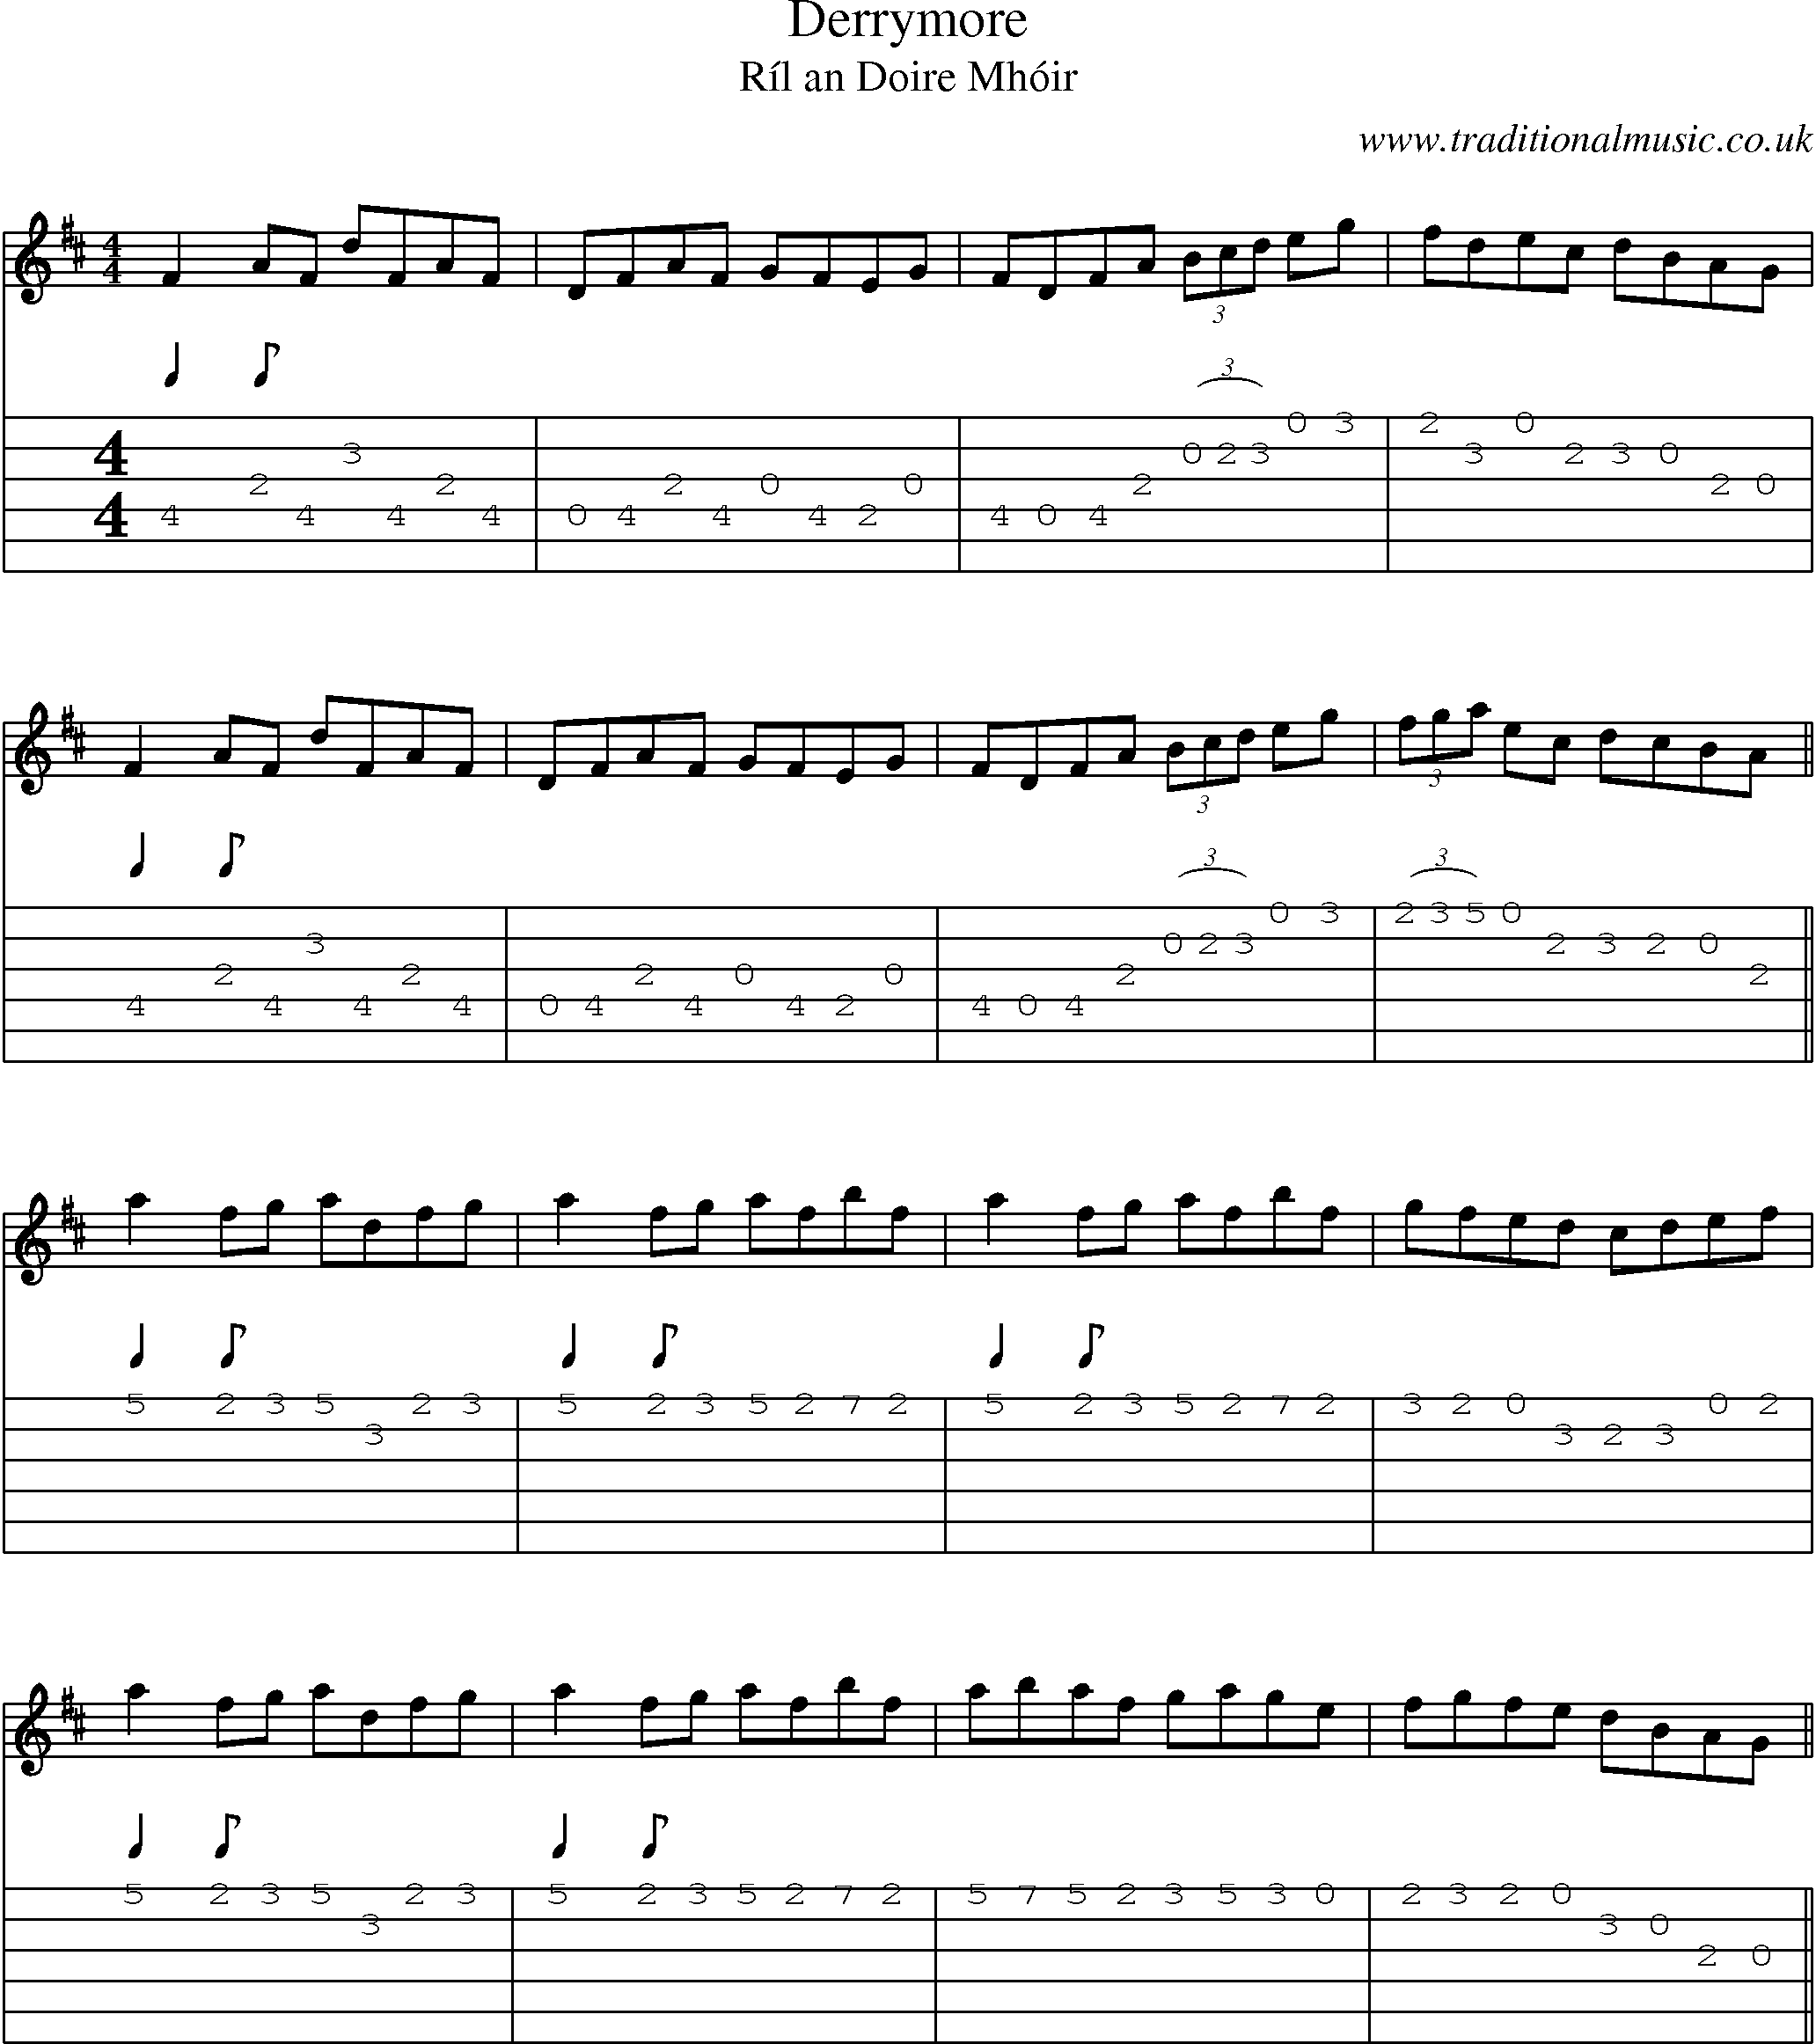 Music Score and Guitar Tabs for Derrymore